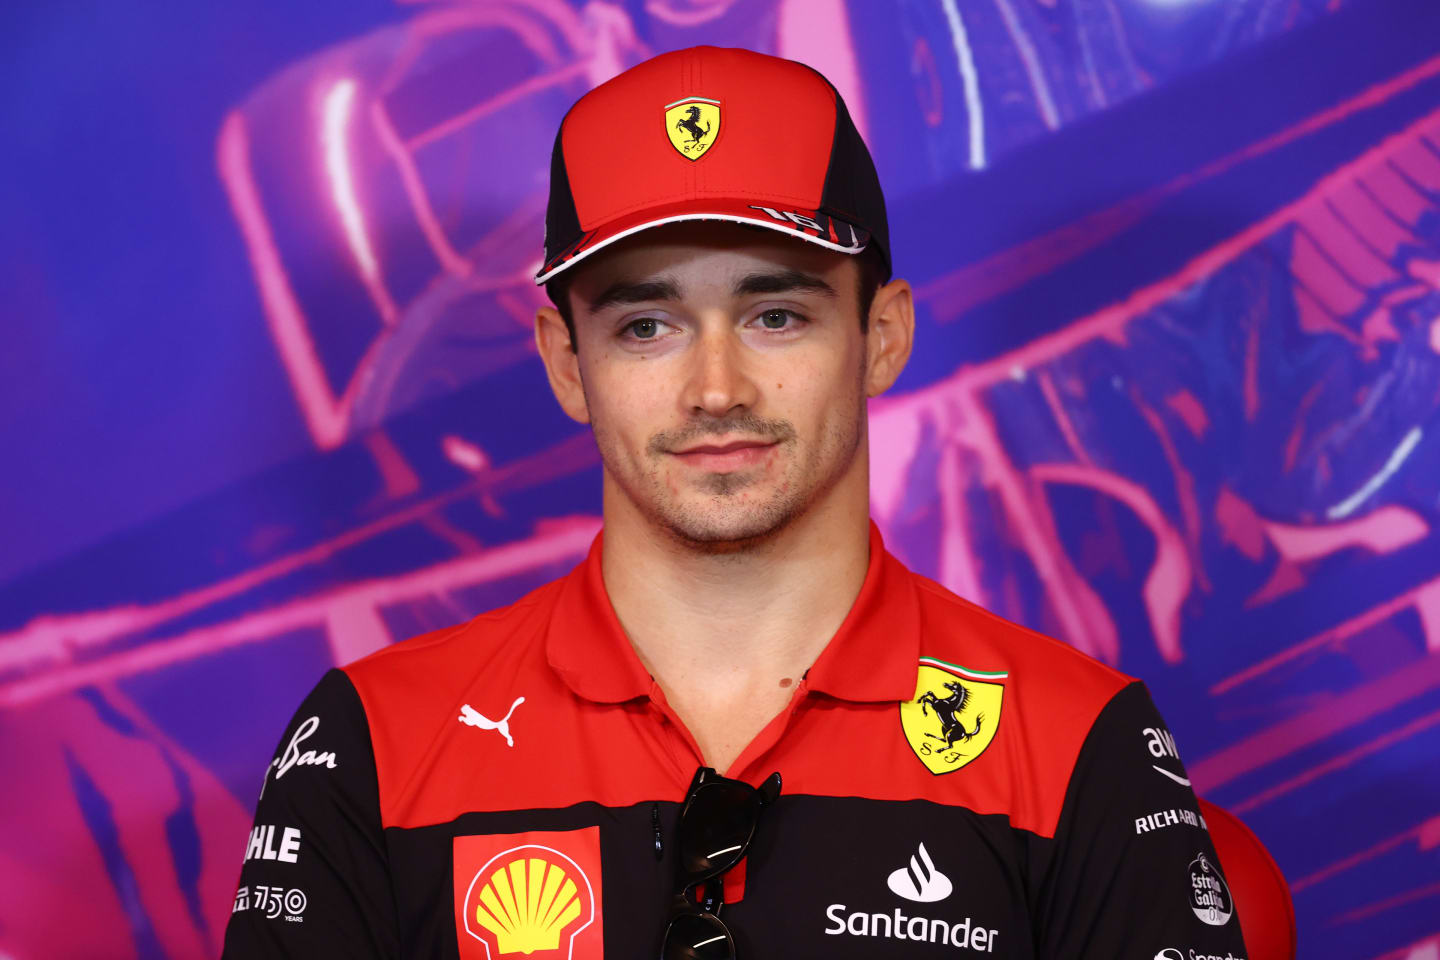 MONTREAL, QUEBEC - JUNE 17: Charles Leclerc of Monaco and Ferrari looks on in the Drivers Press Conference prior to practice ahead of the F1 Grand Prix of Canada at Circuit Gilles Villeneuve on June 17, 2022 in Montreal, Quebec. (Photo by Dan Istitene/Getty Images)